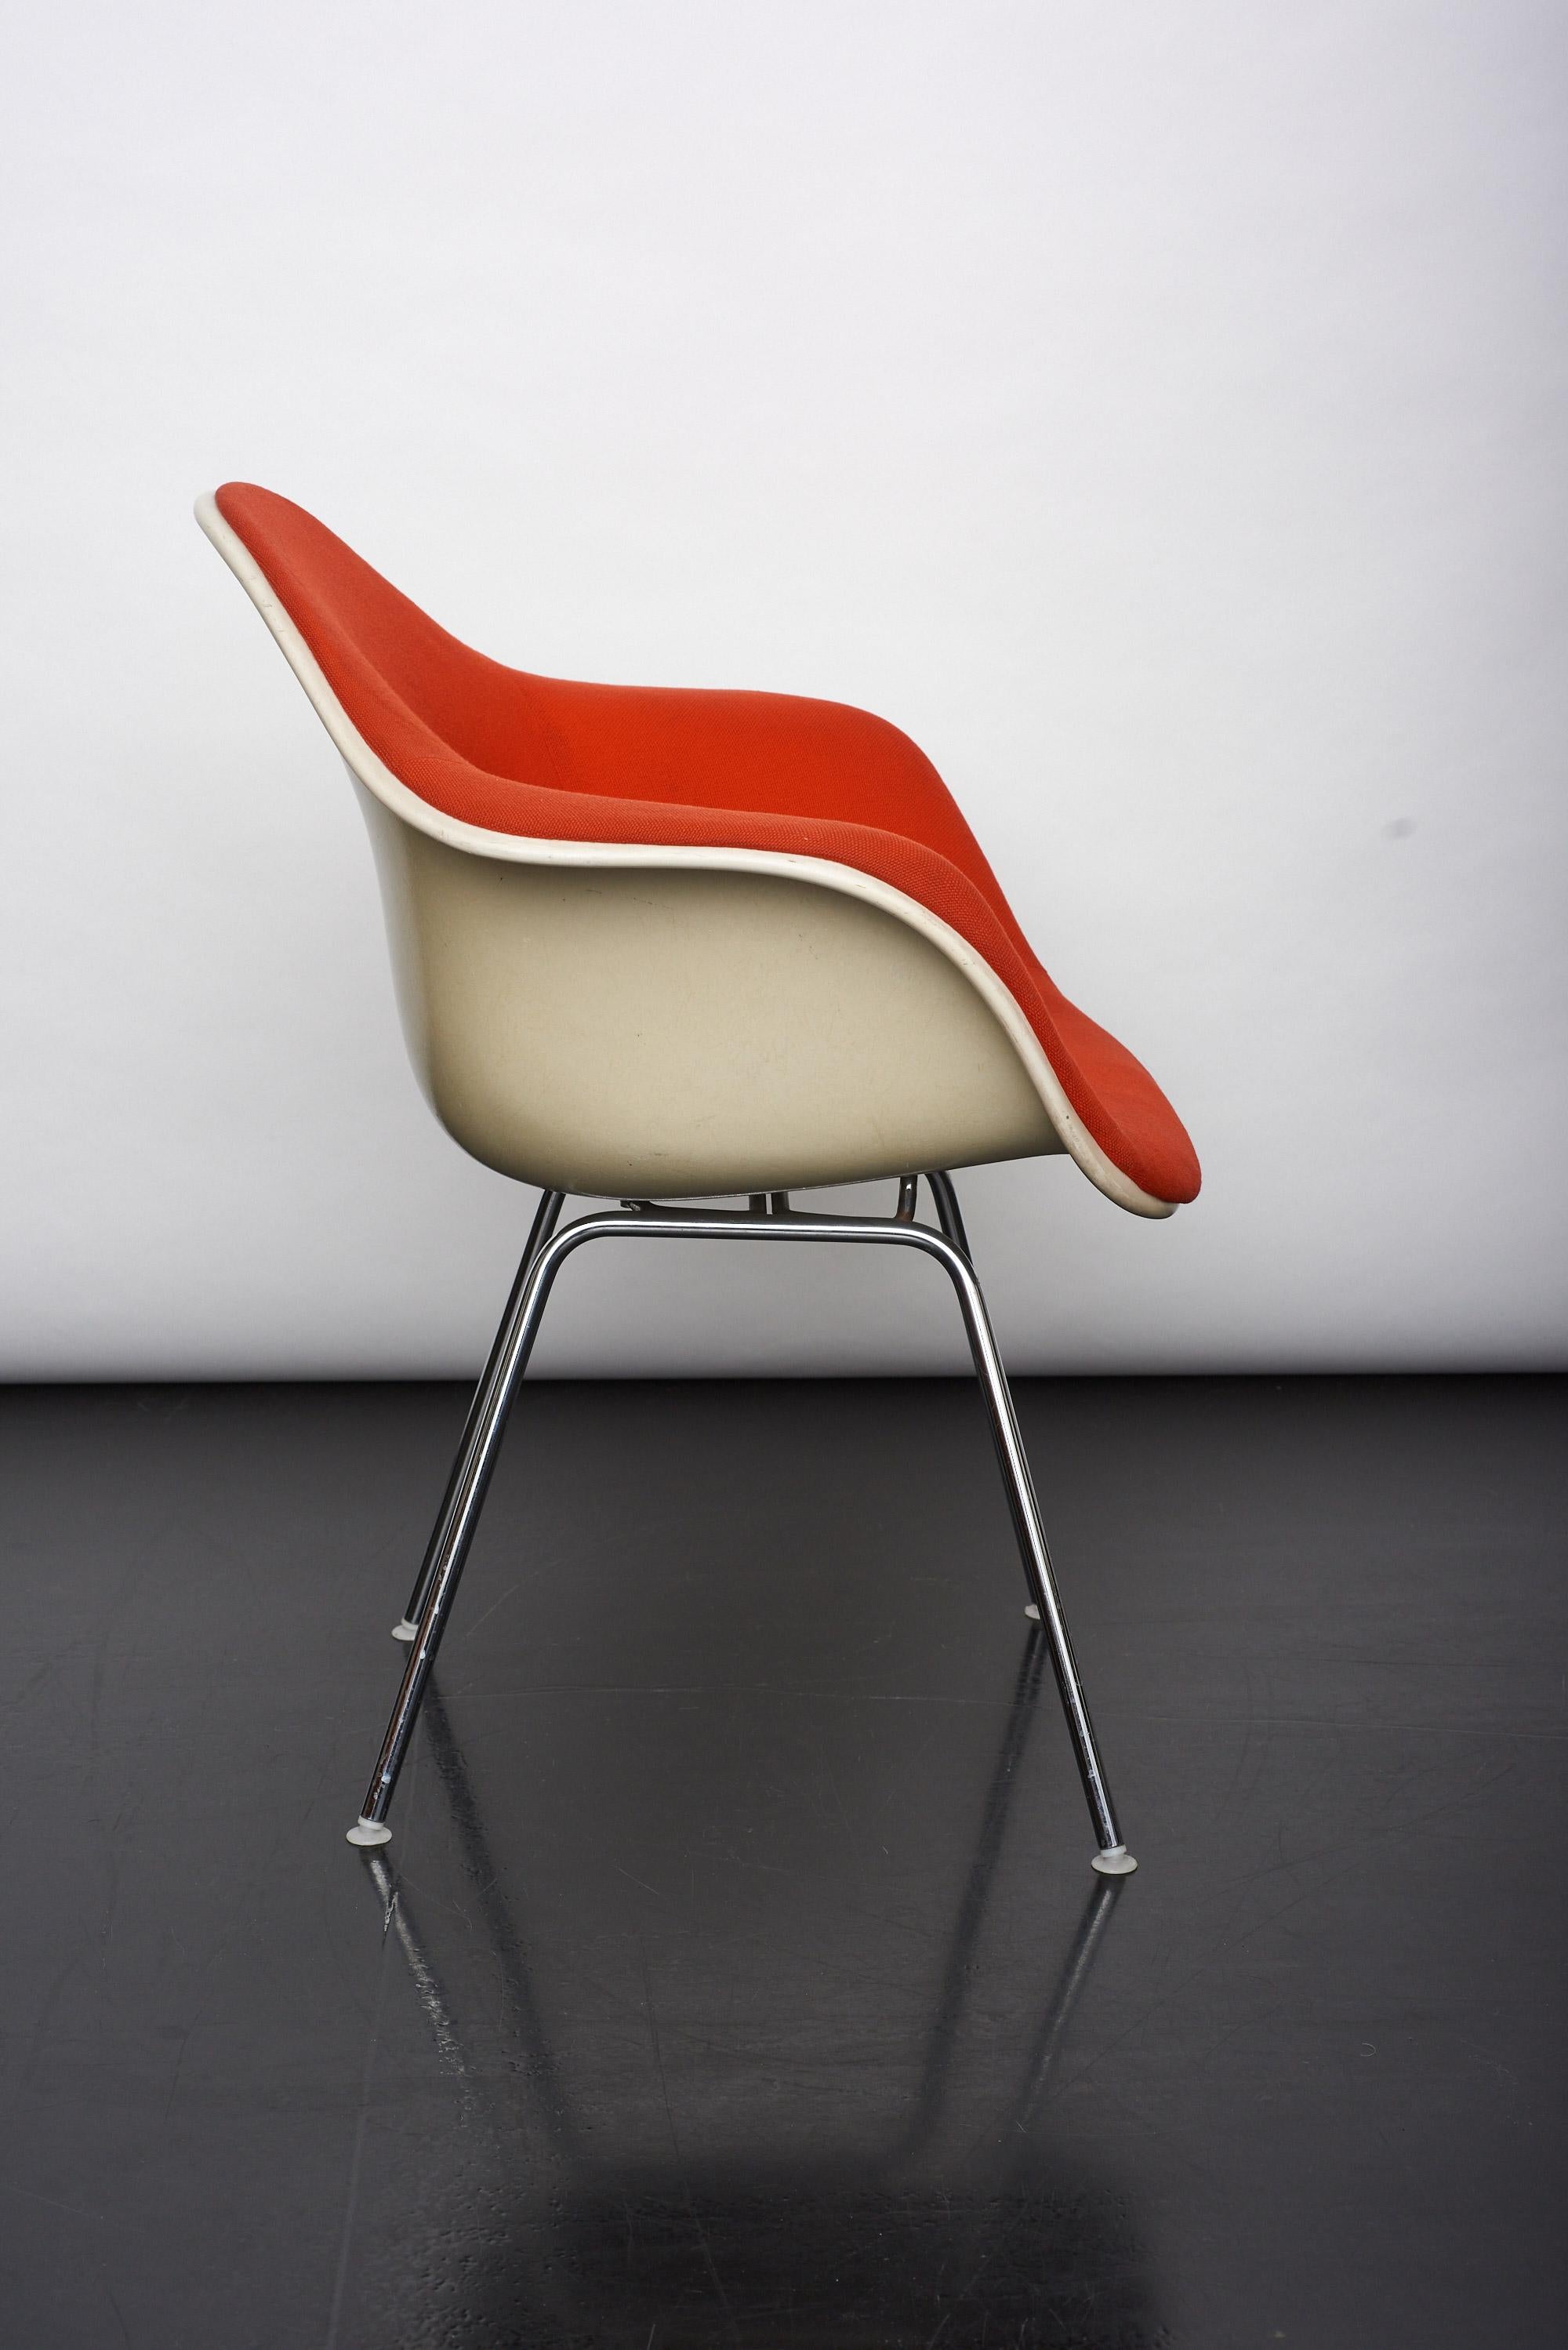 The DAX chair combines the shell of the 'Eames armchairs' with a classic four-legged base and is thus a realisation of the chair concept created by Charles and Ray Eames in the 1950s. Thanks to its relatively simple appearance, the dax chair is